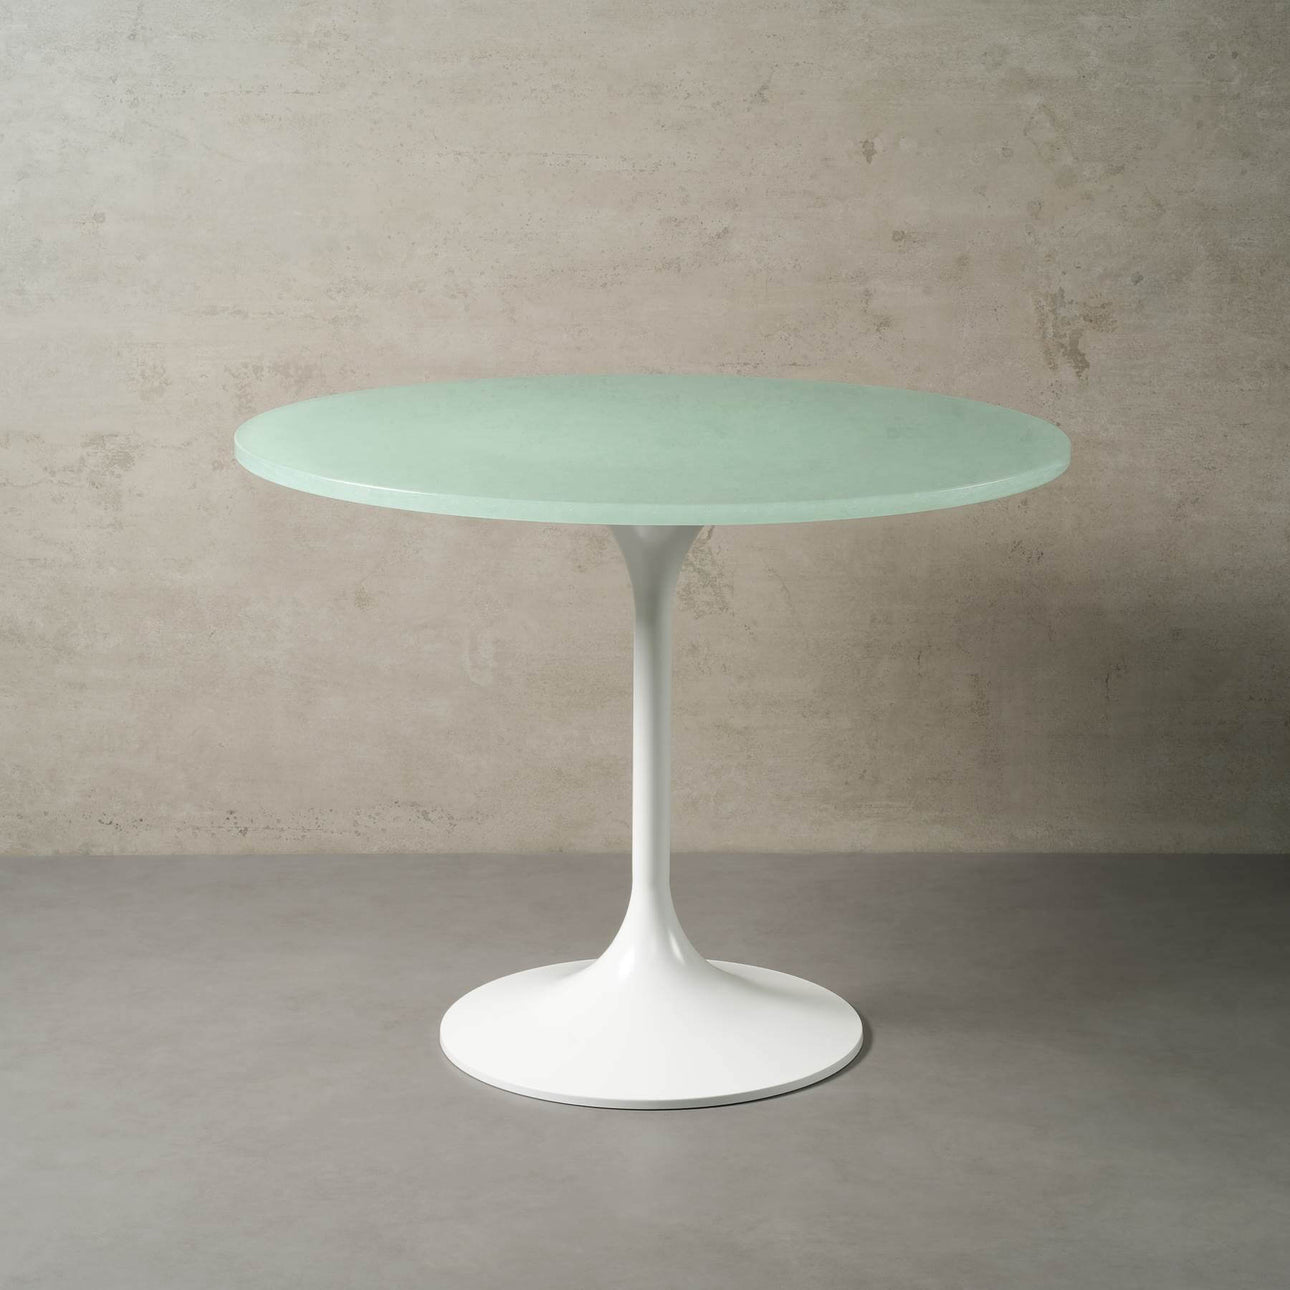 Tokyo glass ceramic dining table